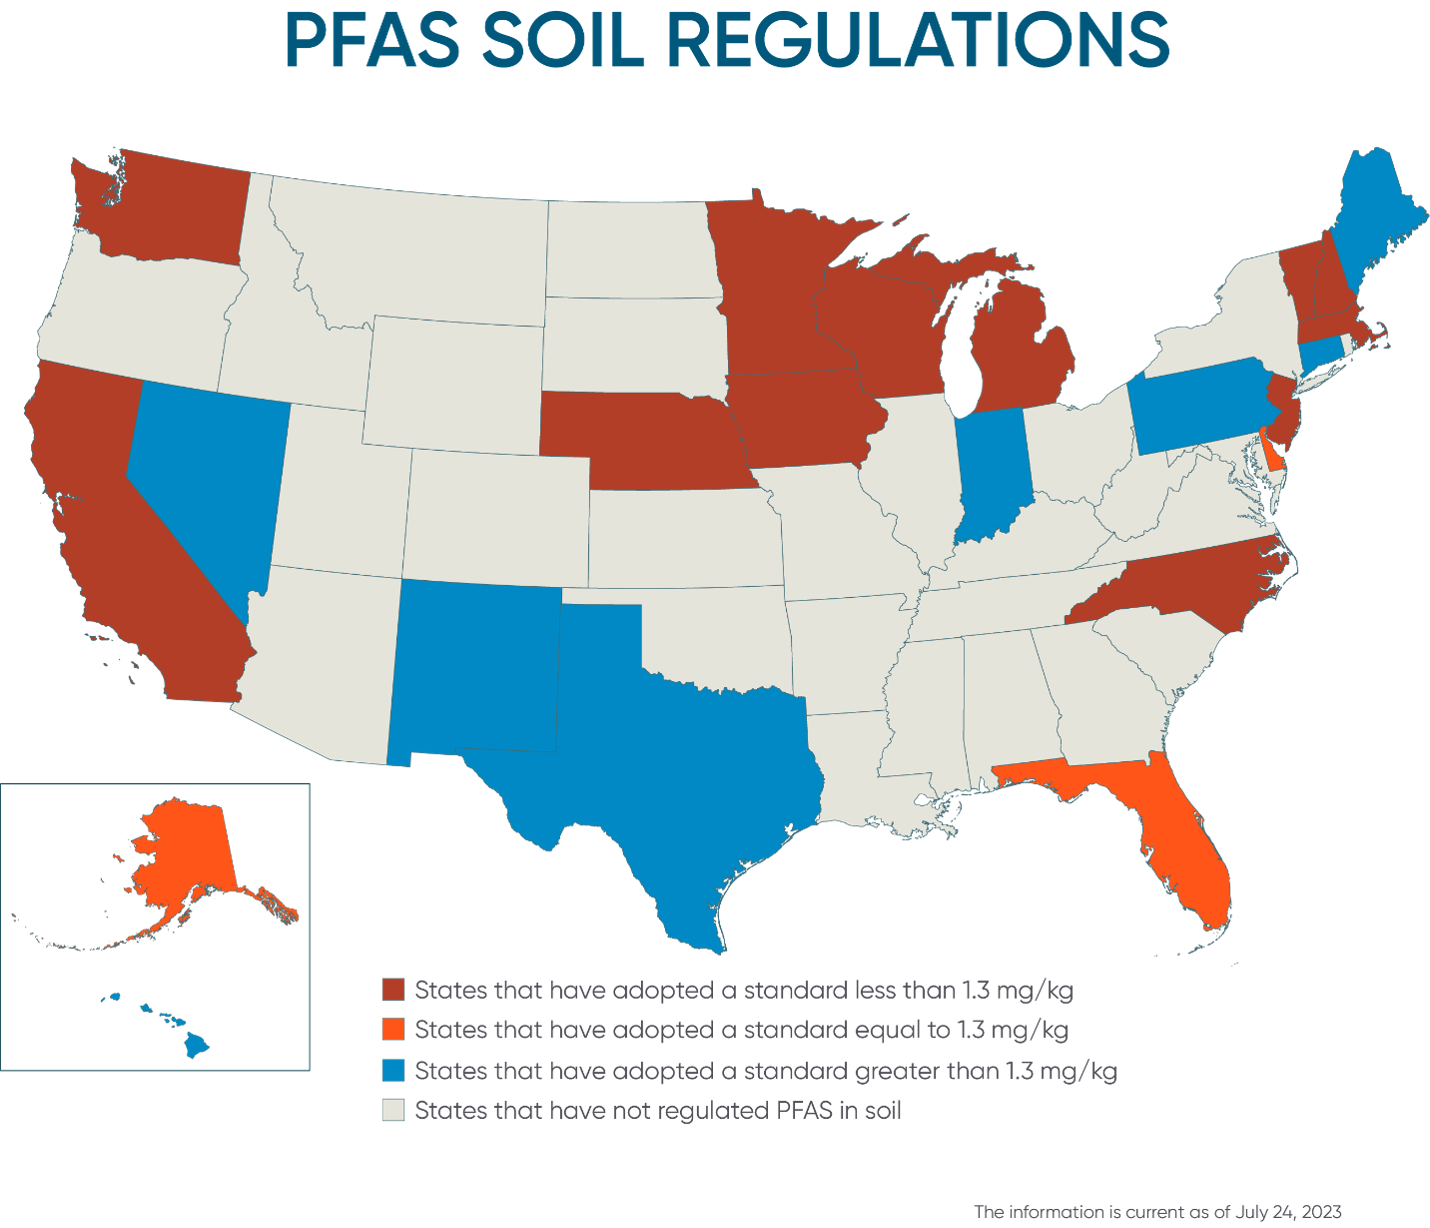 Map of US highlighting states that have adopted PFAS soil regulations